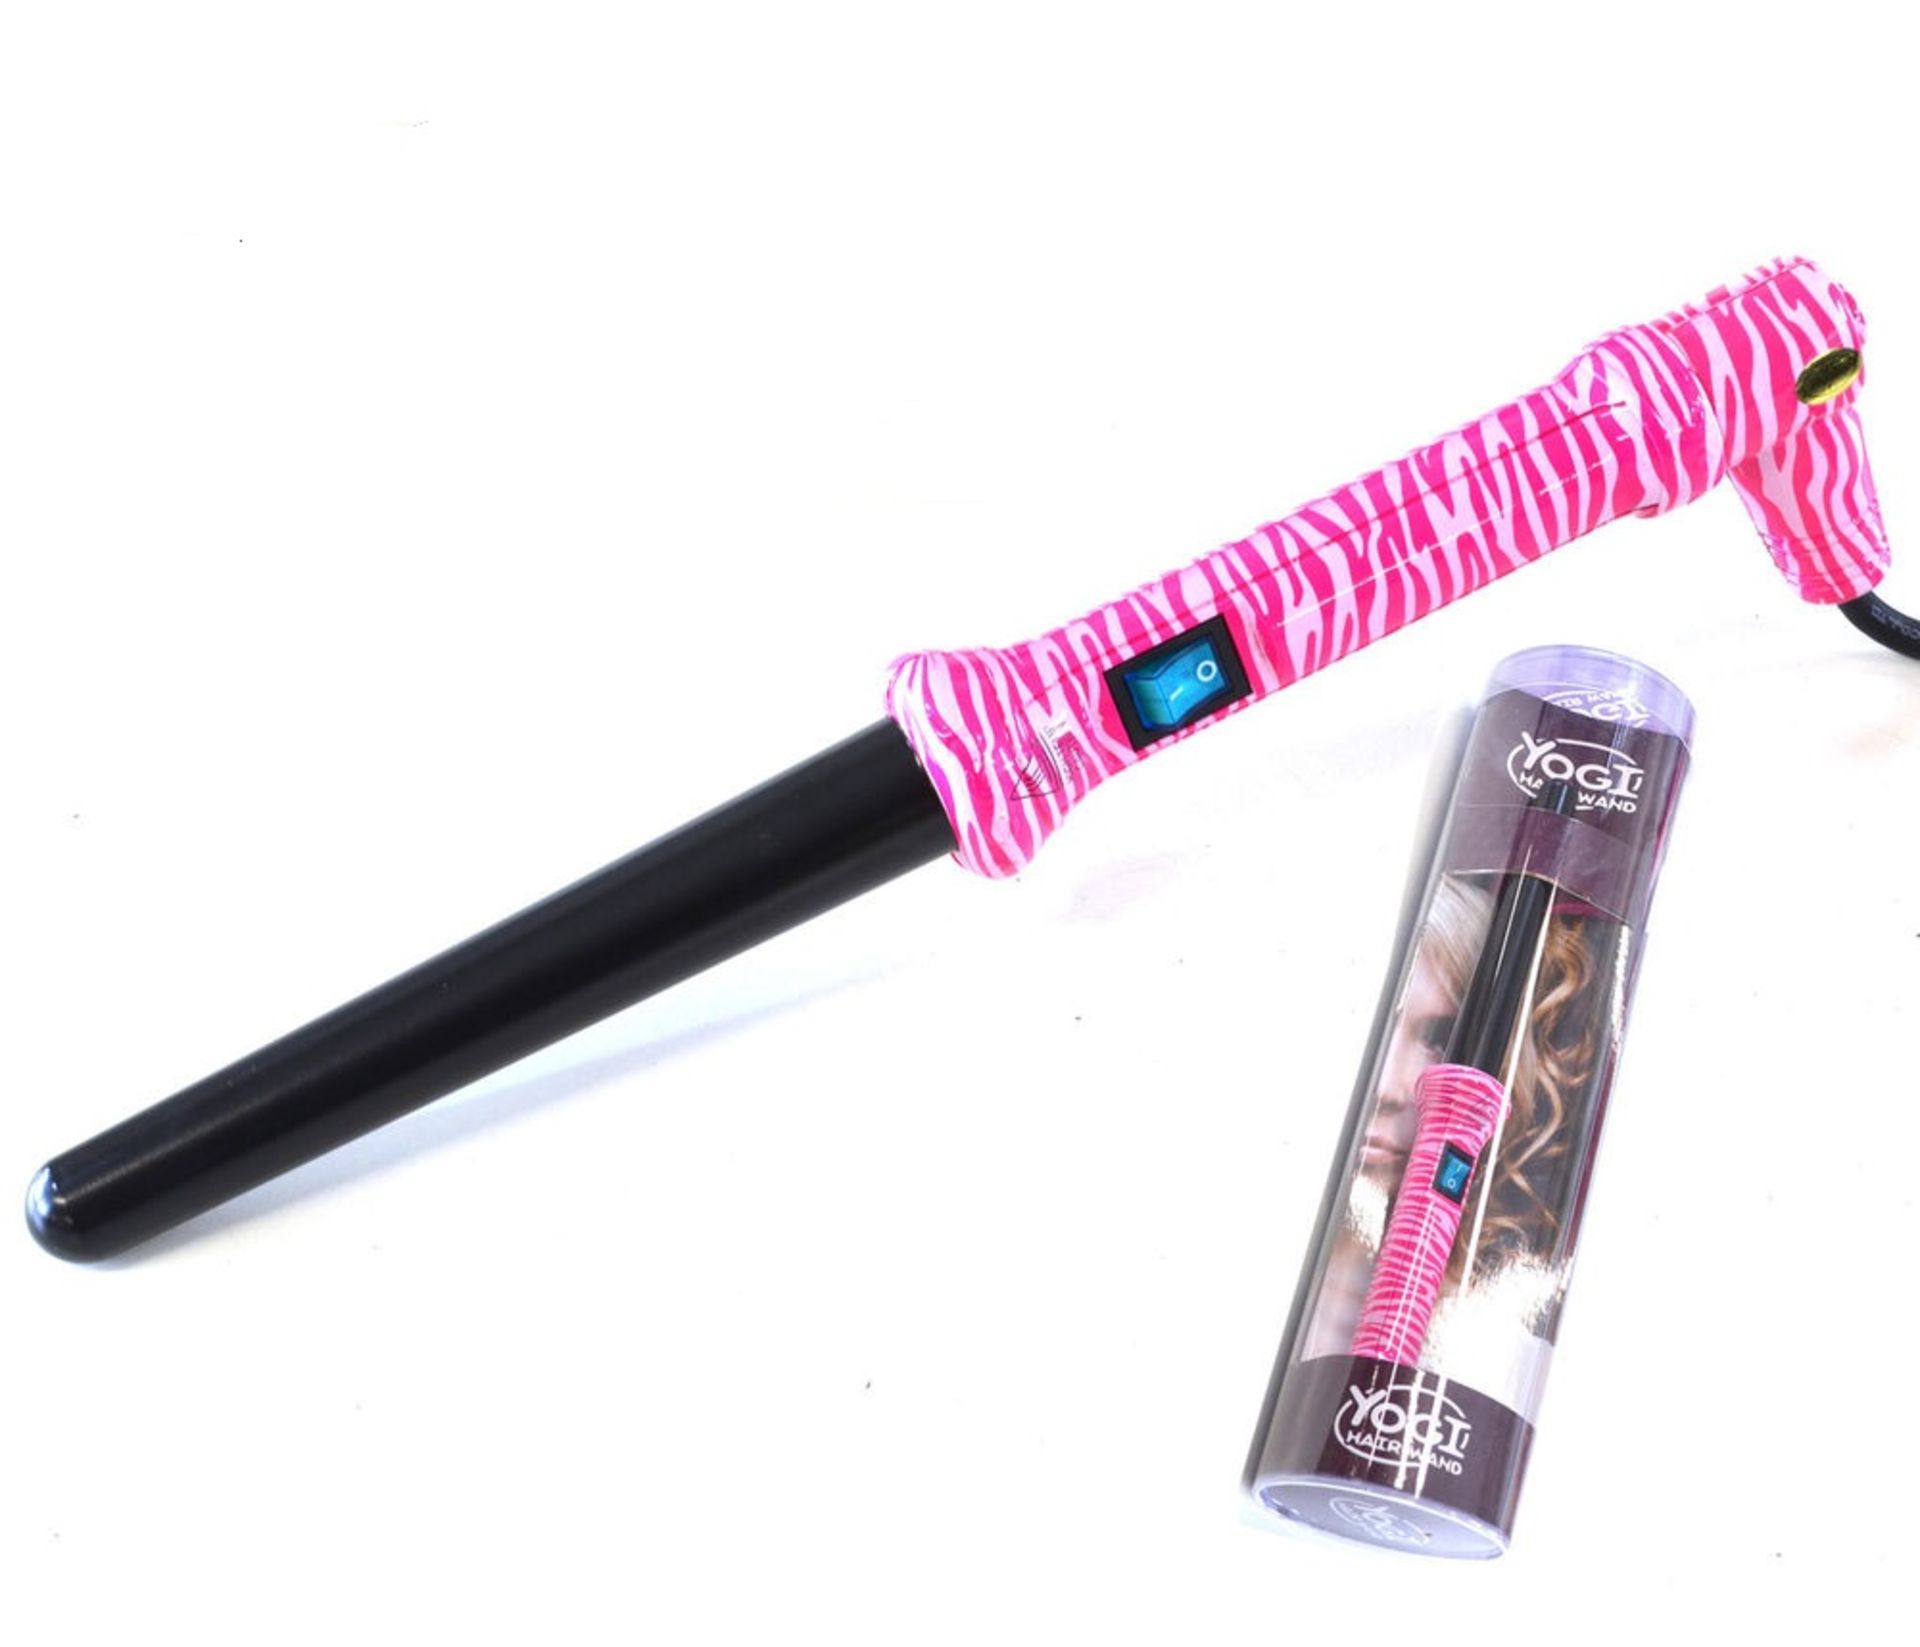 V Brand New Yogi Hair Wand In Pink Zebra Pattern With Tourmaline And Ceramic Infused Barrel RRP £